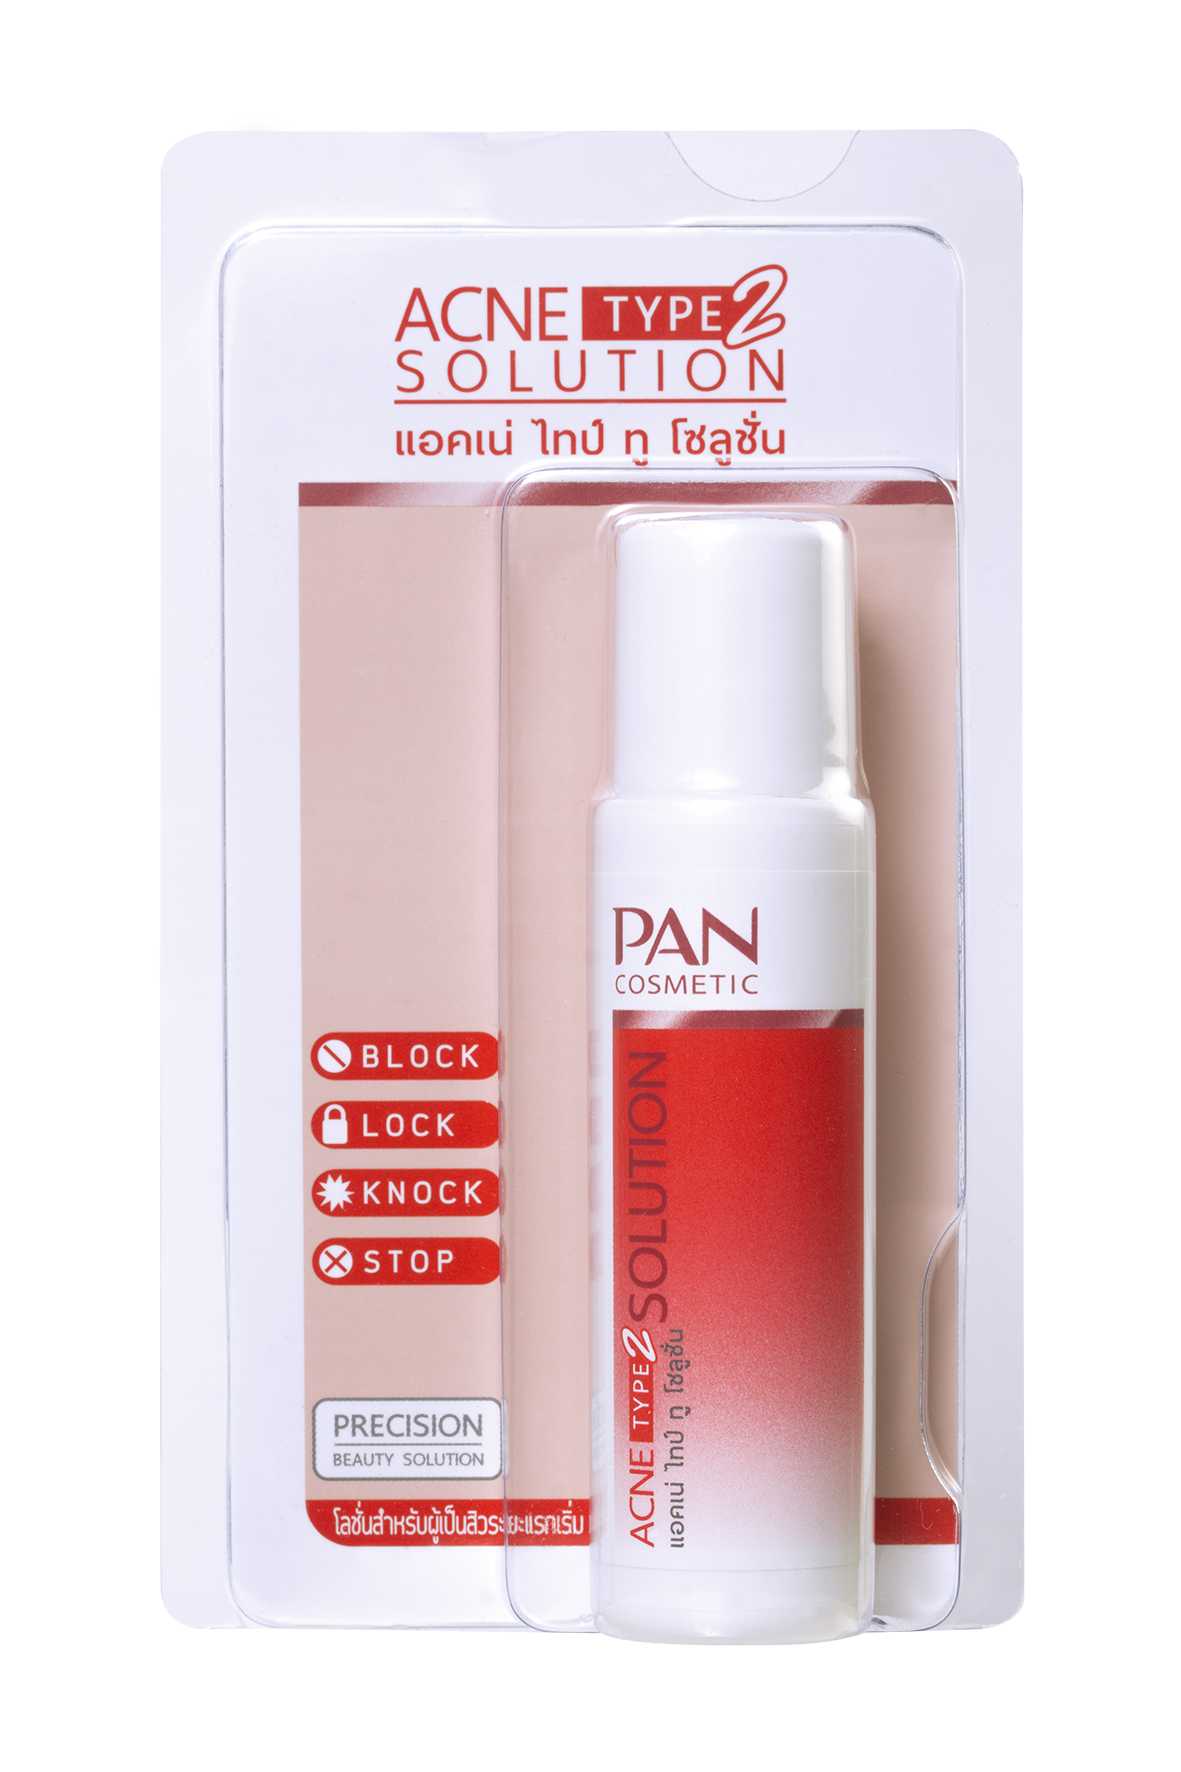 Acne TYPE 2 solution  (NEW)